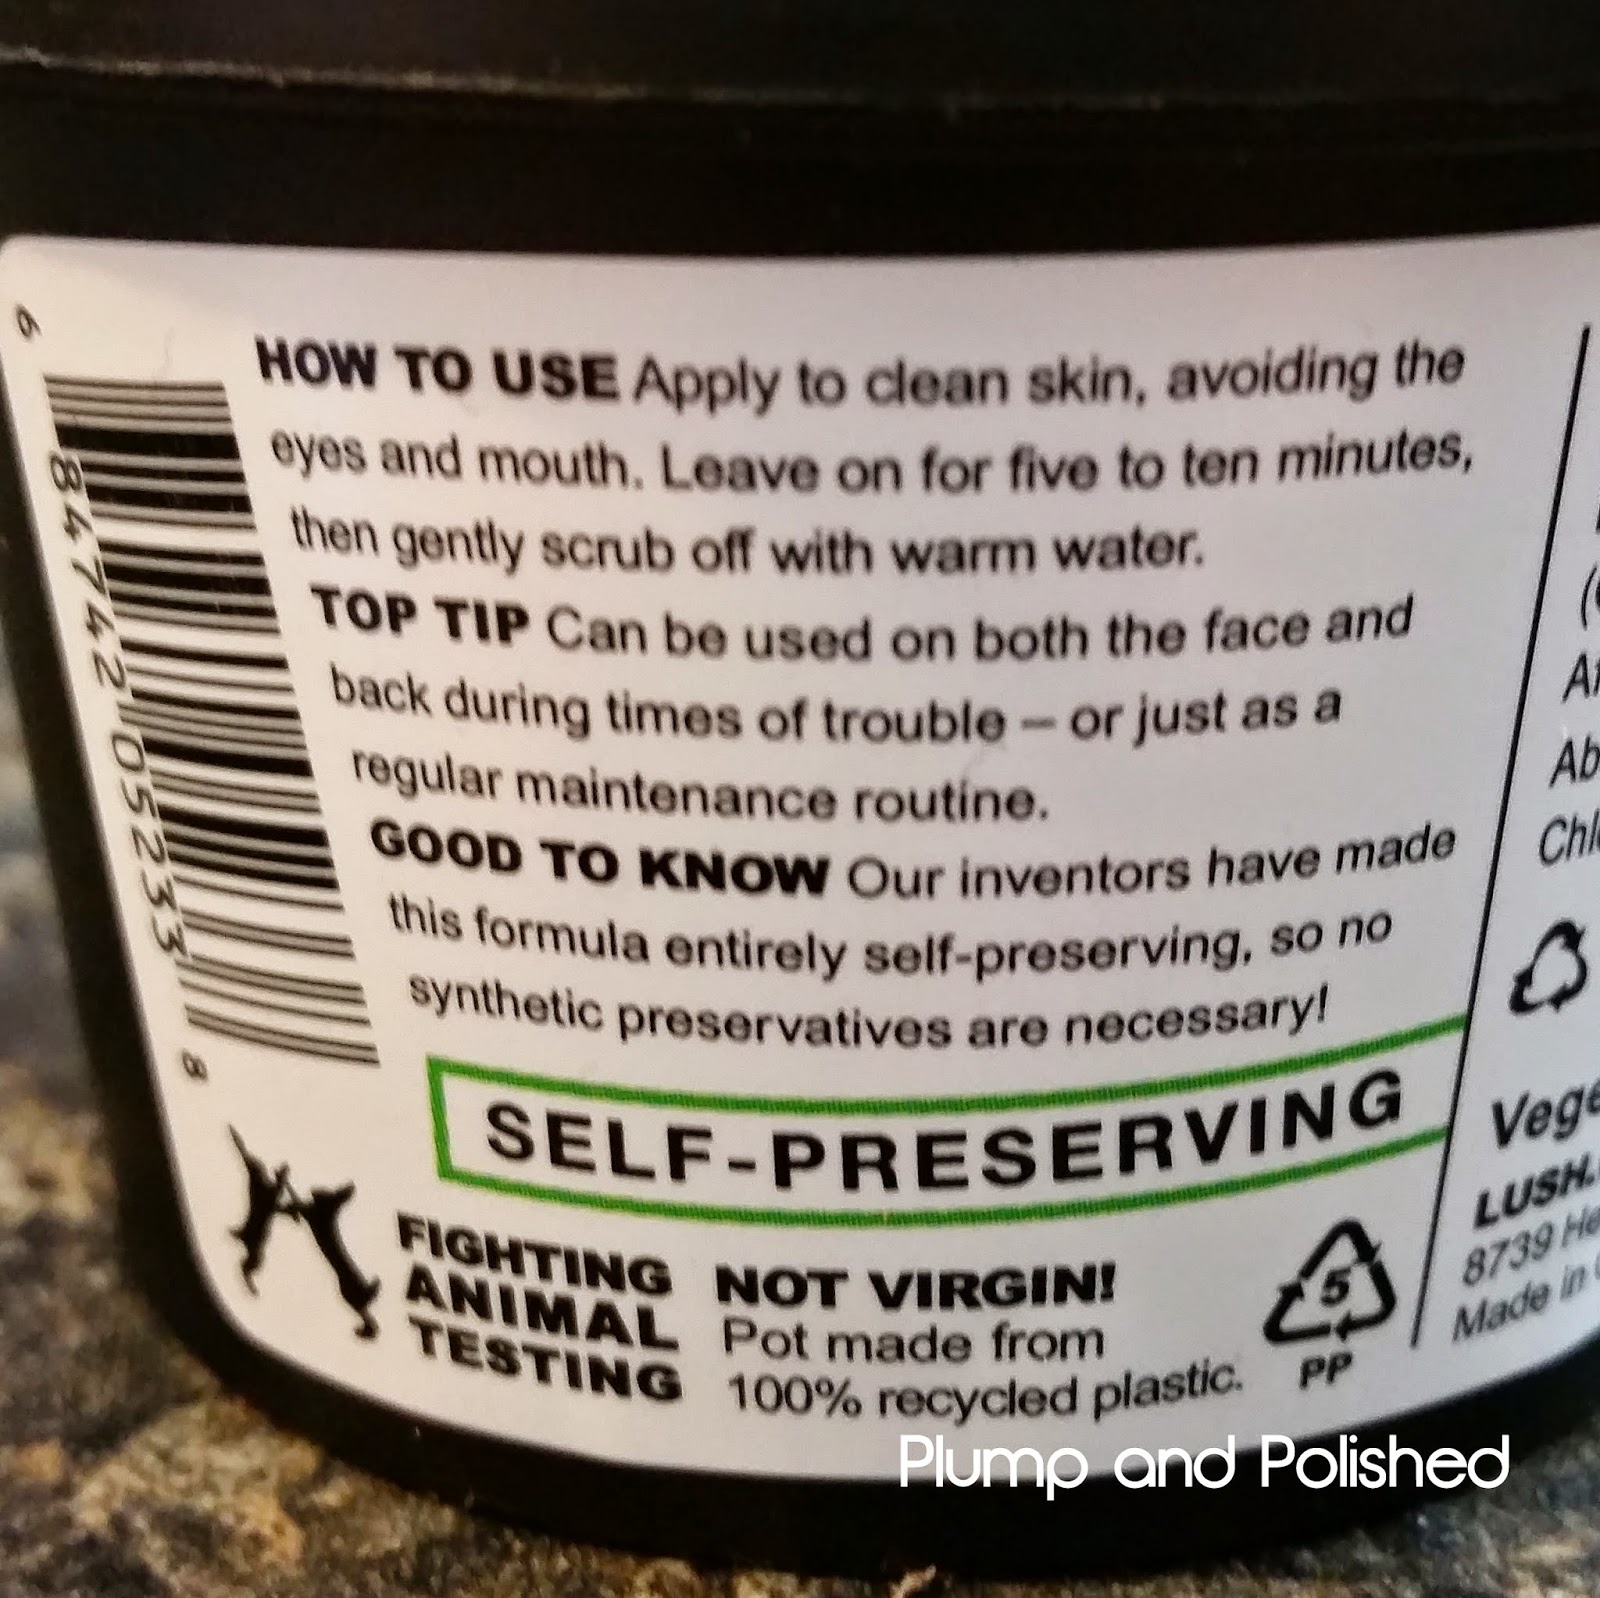 Lush Cosmetics - Self Preserving Mask of Magnaminty